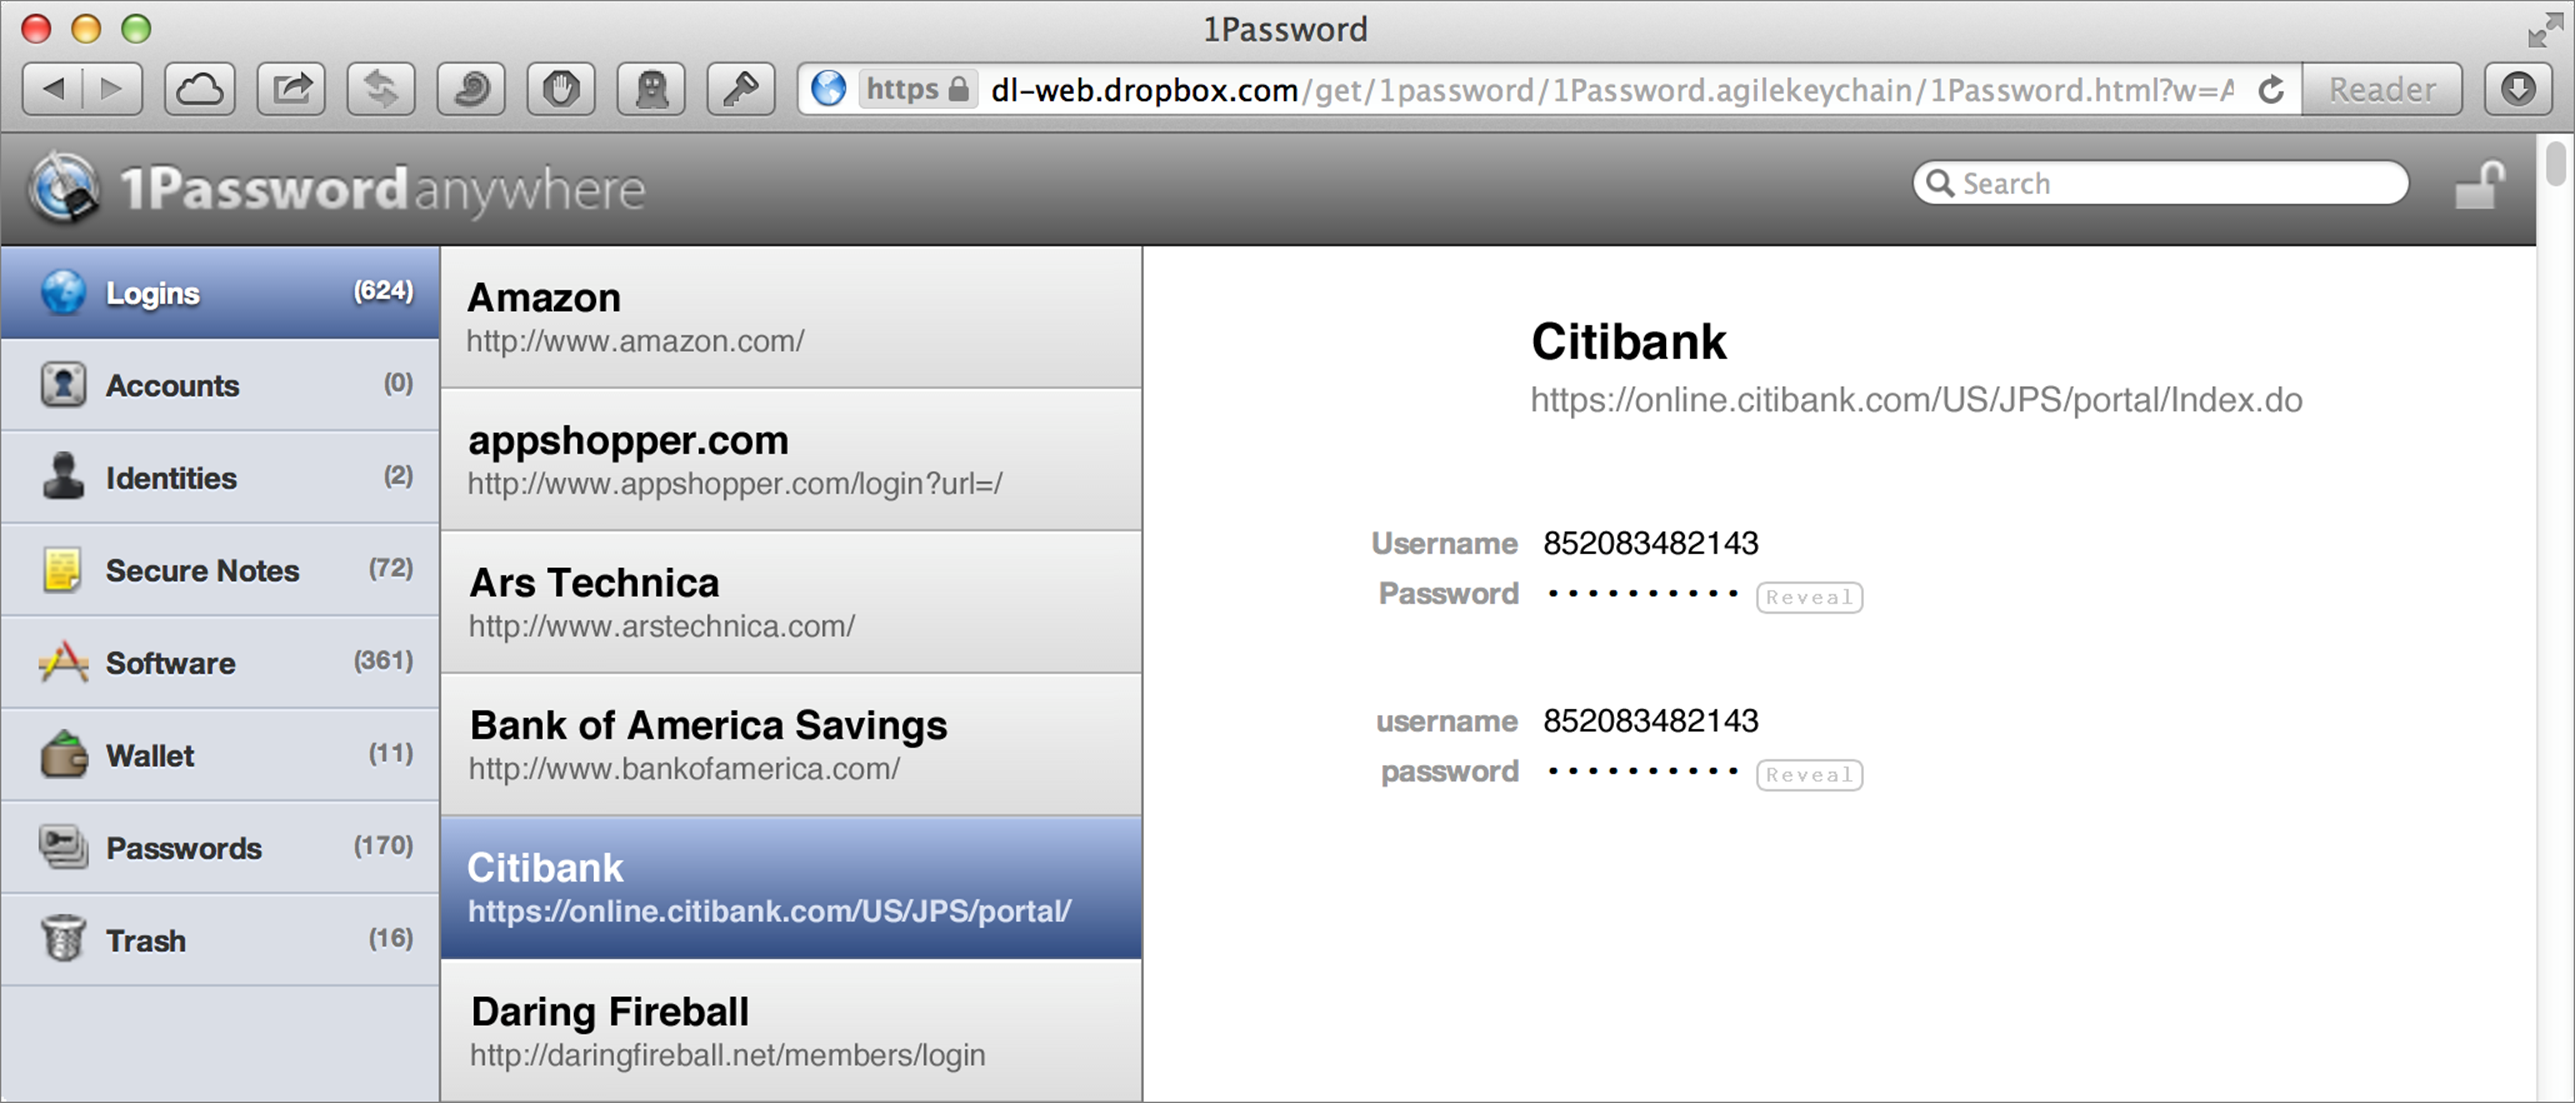 **Figure 39:** 1PasswordAnywhere puts your entire 1Password vault securely in a Dropbox-accessible Web page.